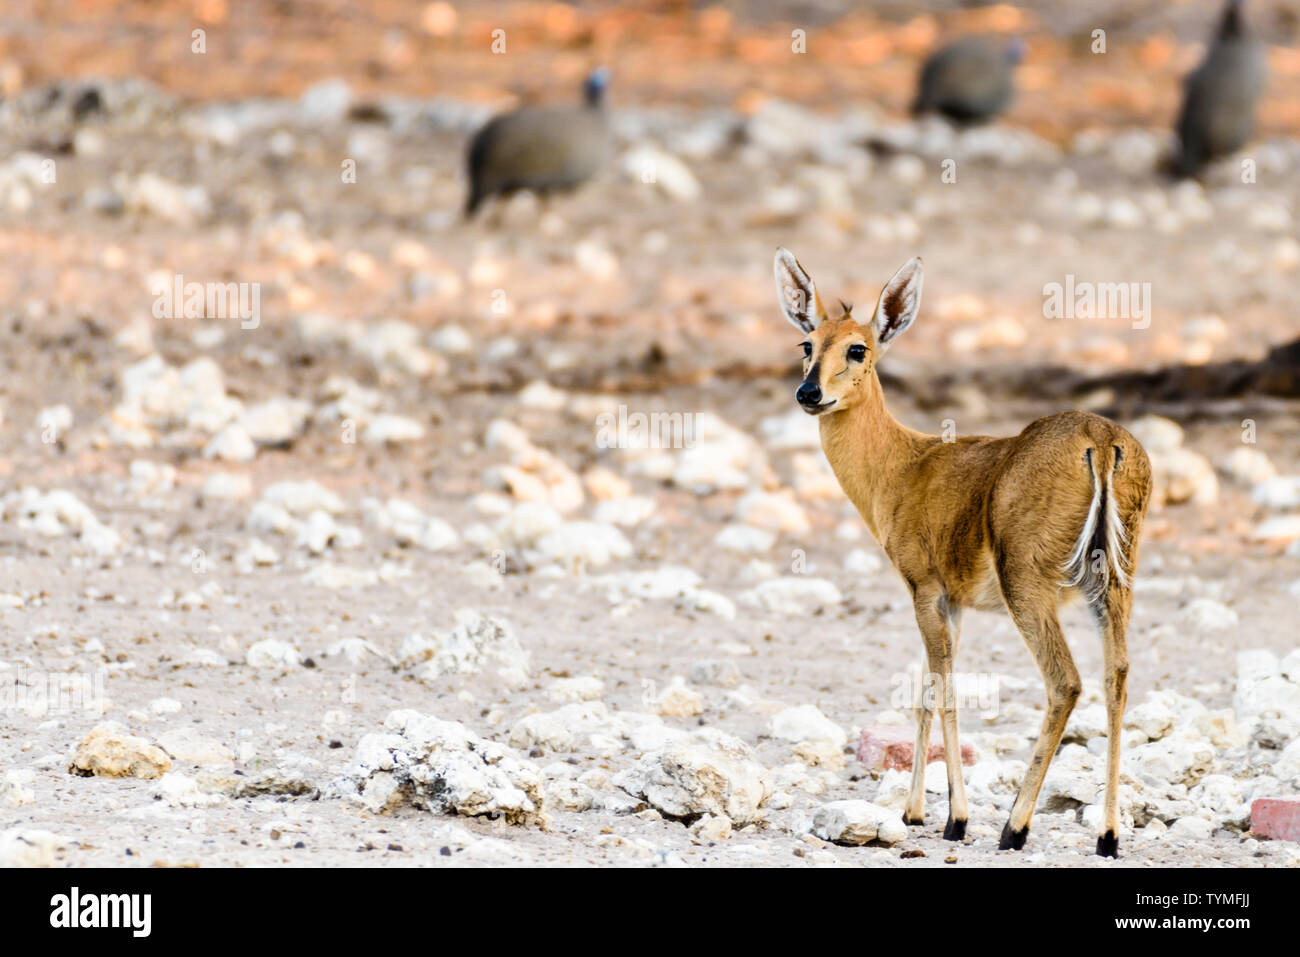 Common duiker in Namibia, one of the smallest African antelope, standing only 50cm high. Stock Photo